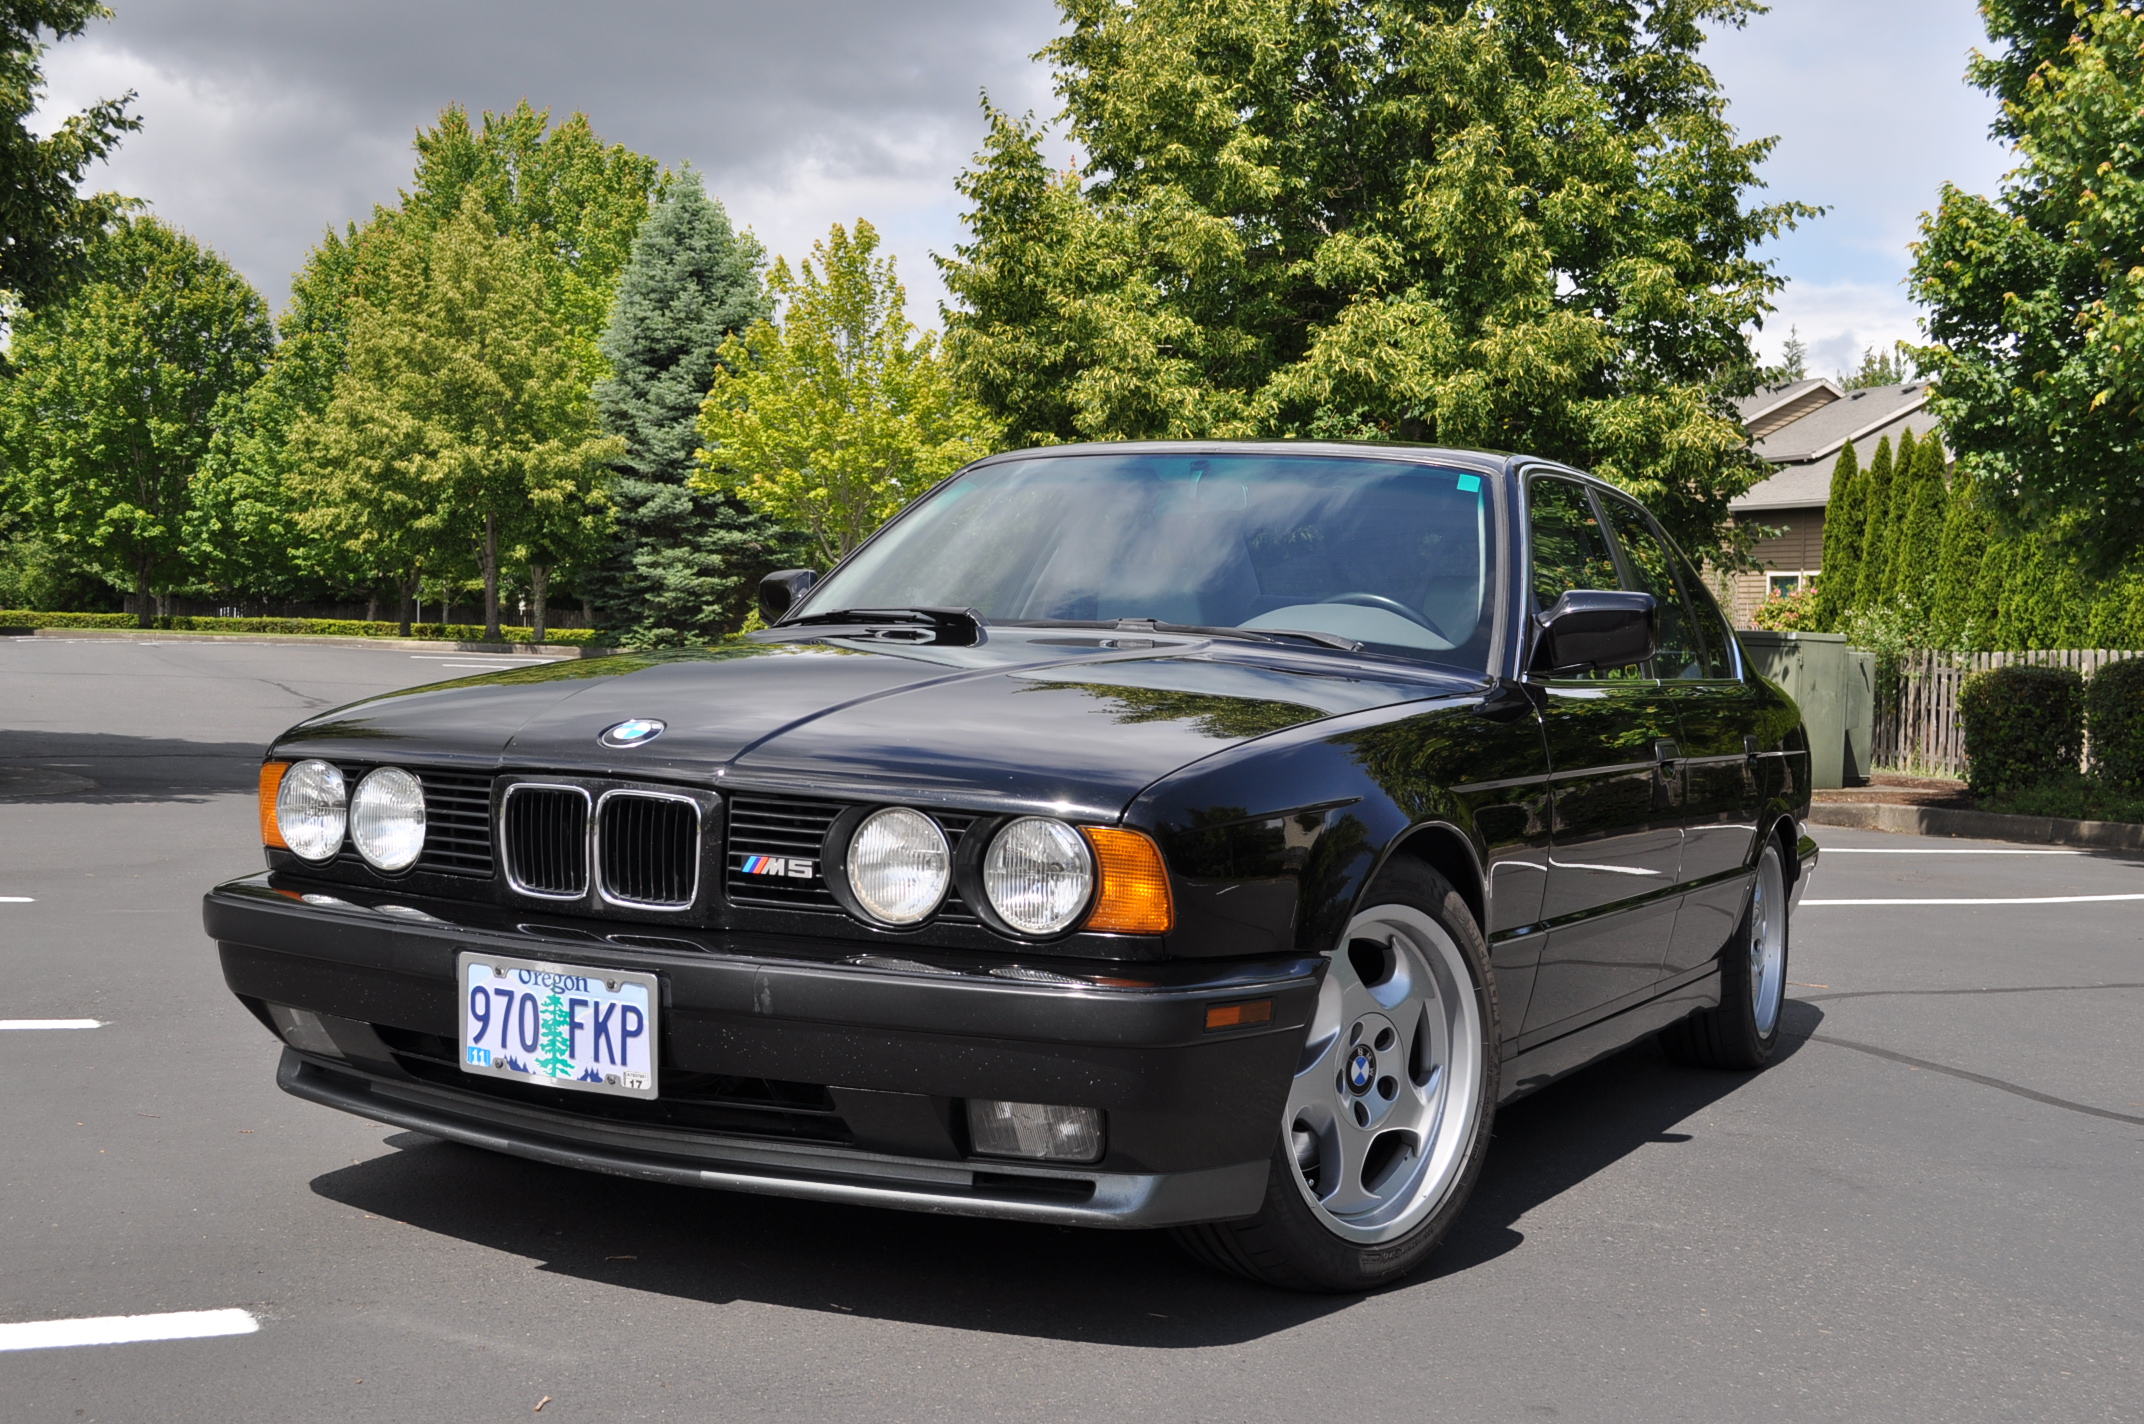 BMW explains what to look for when buying an E34 5-Series